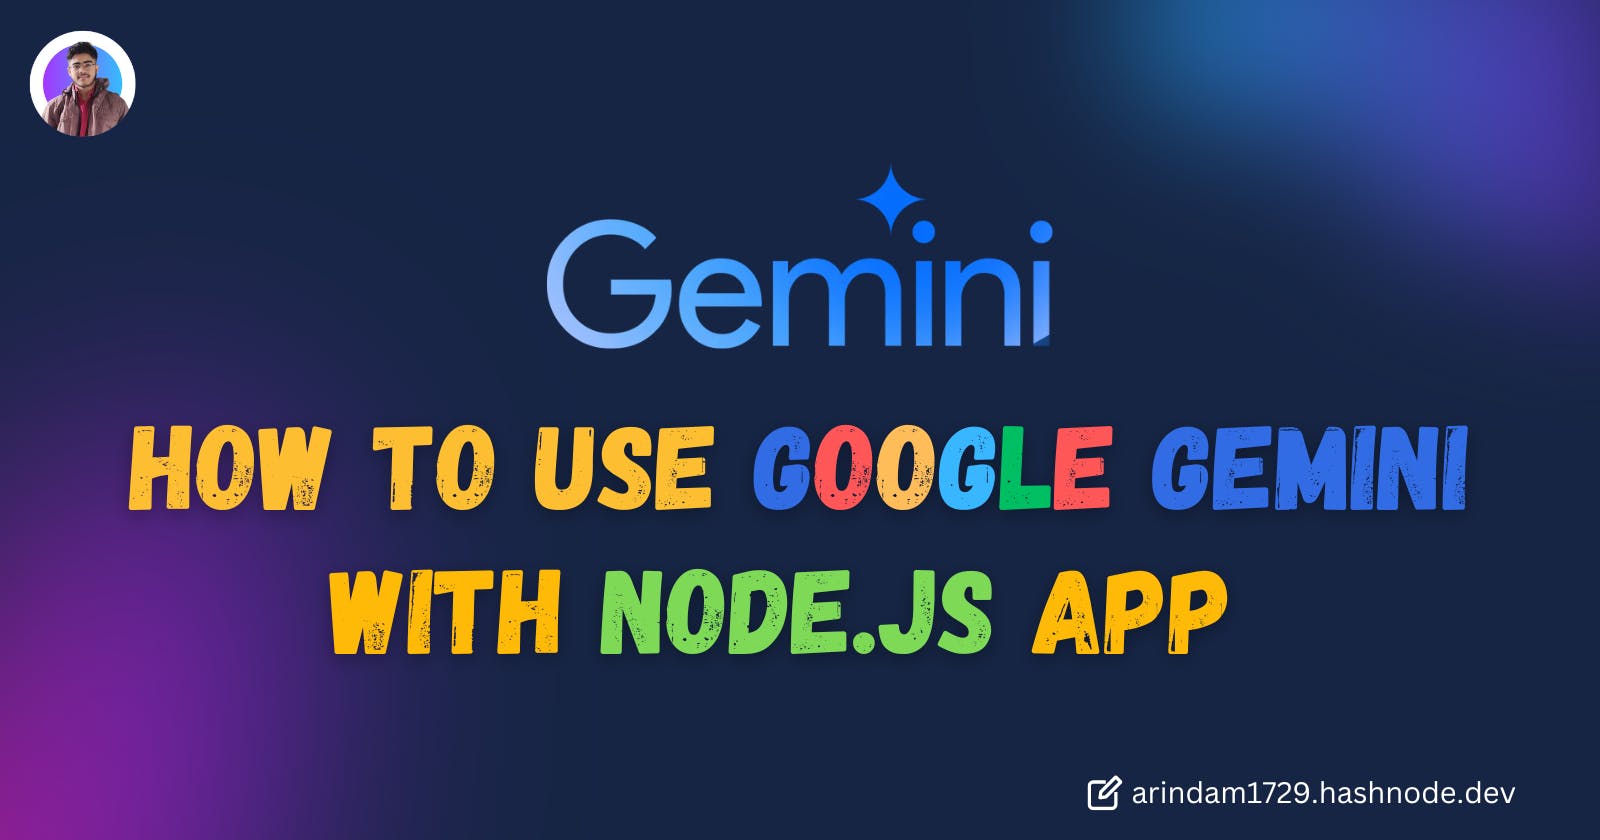 How to Use Google Gemini with Node.js App